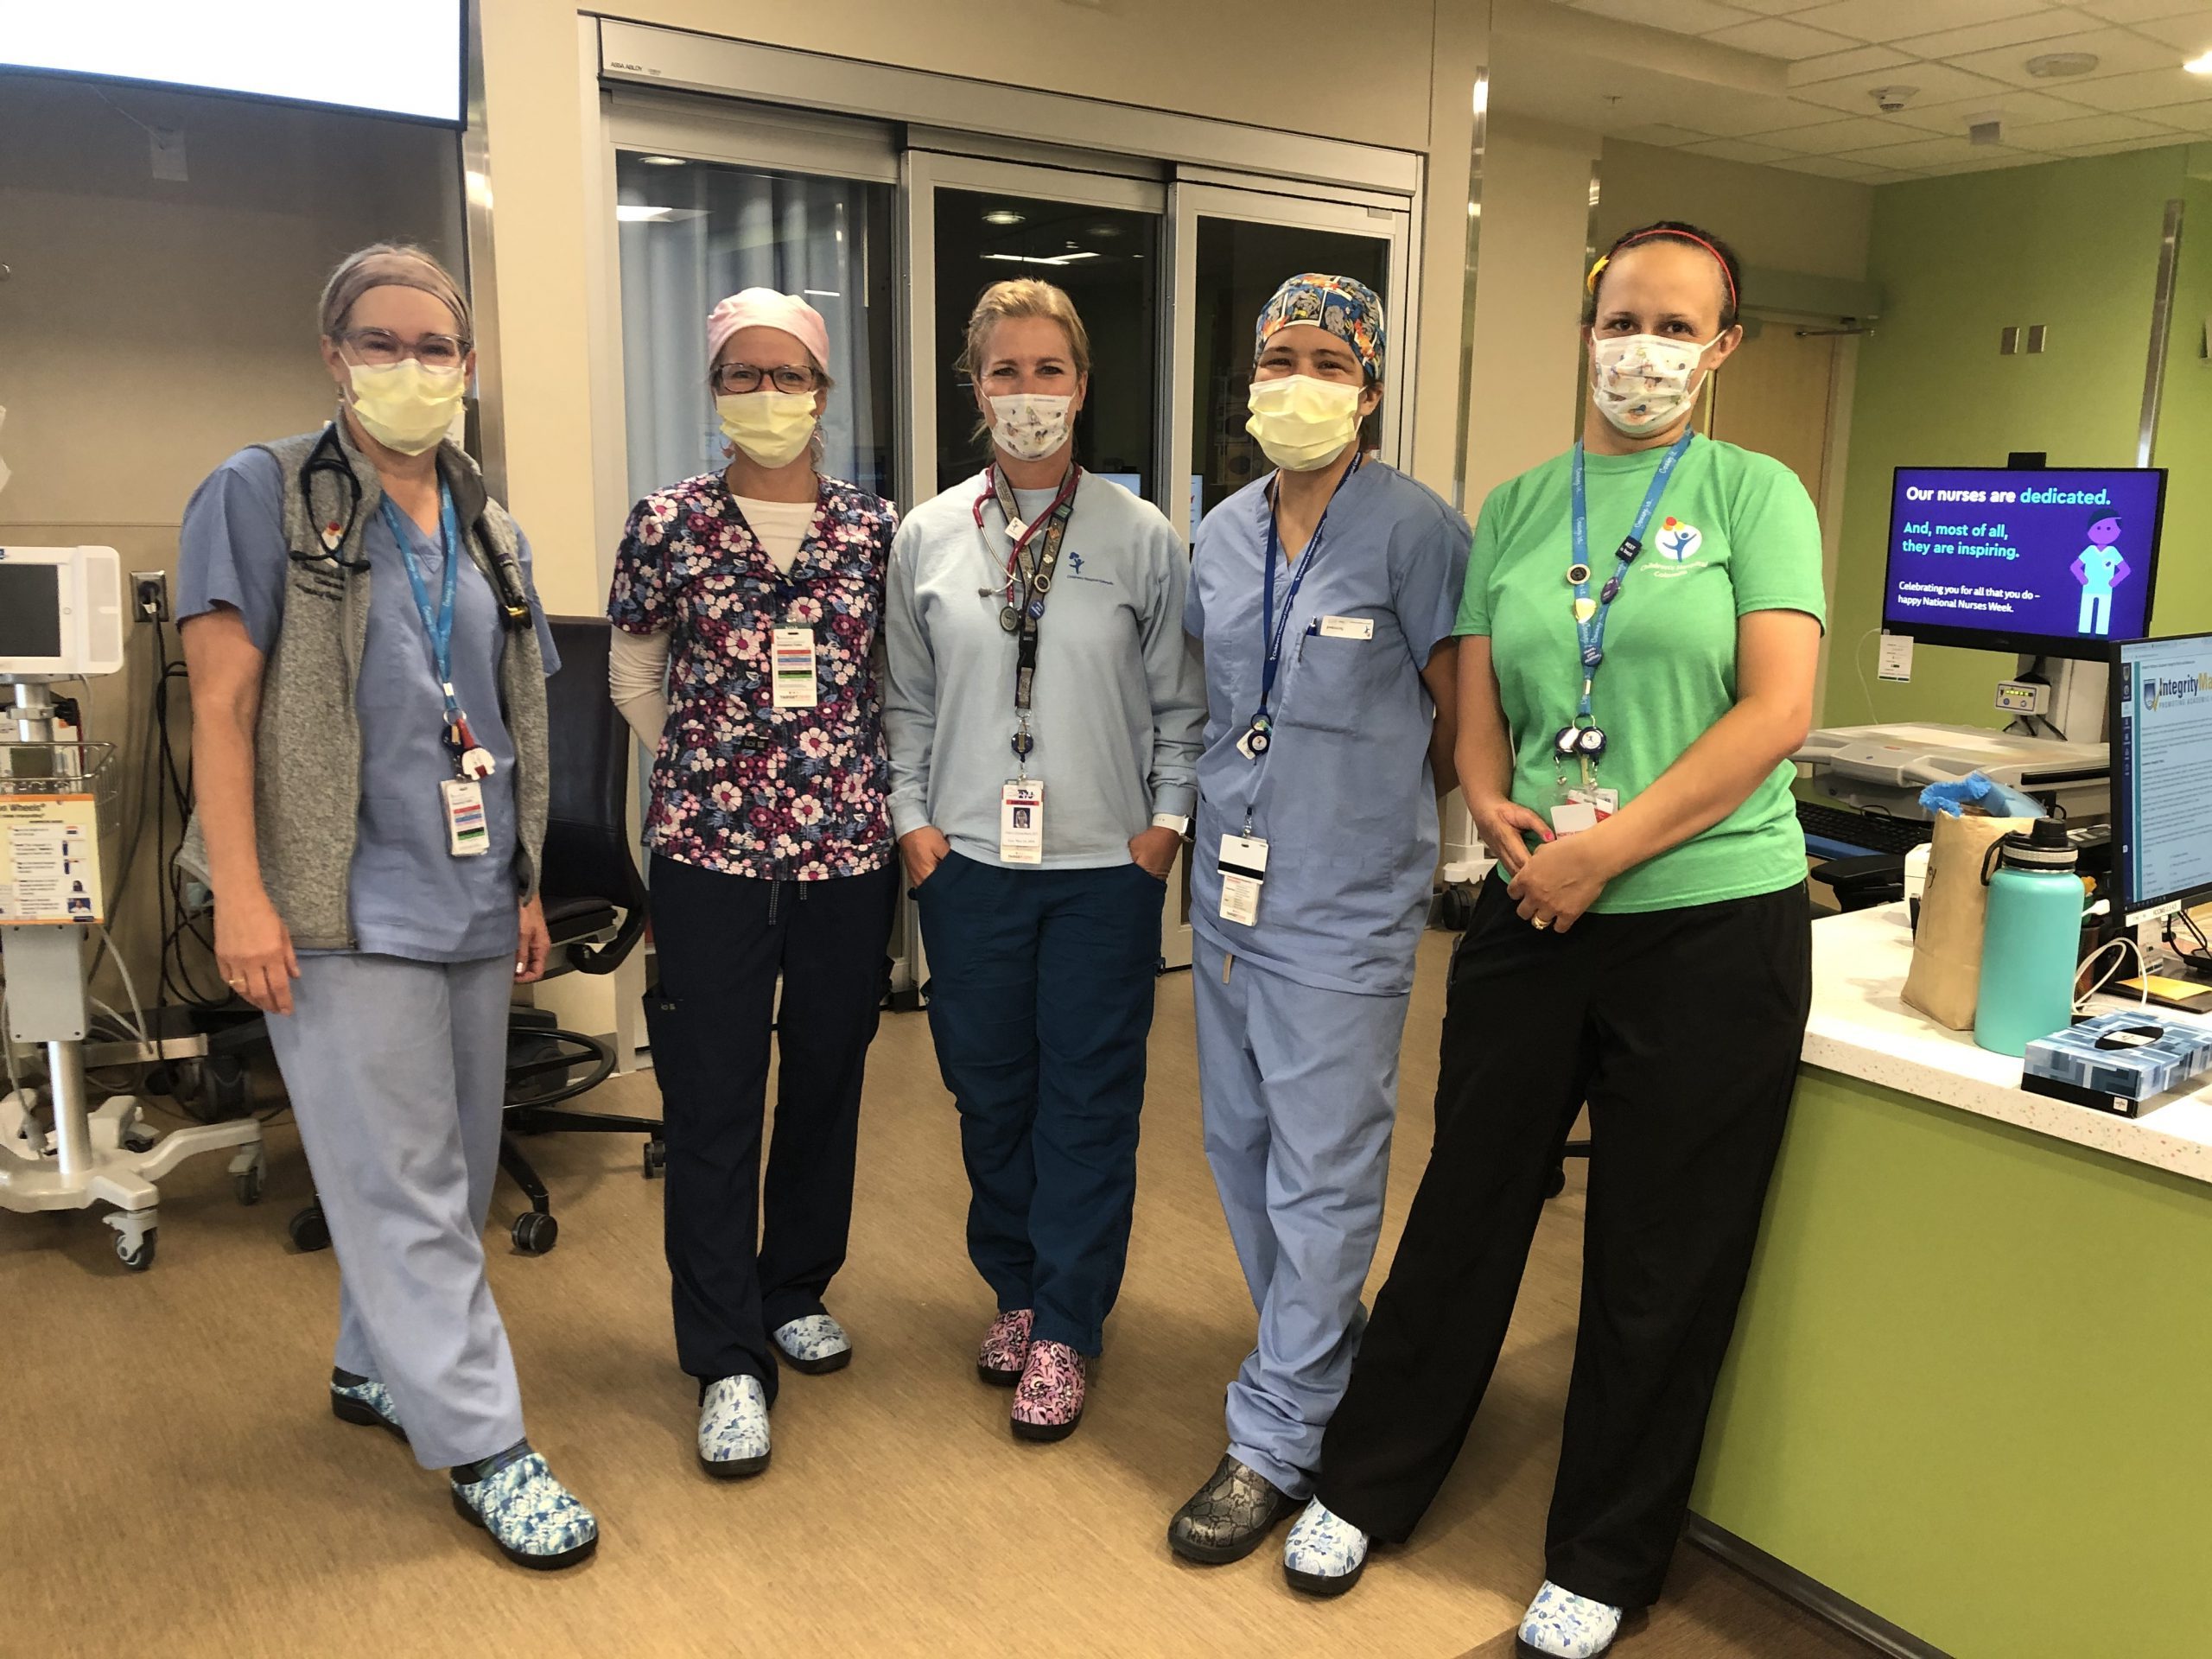 Photo of five workers at Children's Hospital Colorado wearing Crocs clogs donated by the company.